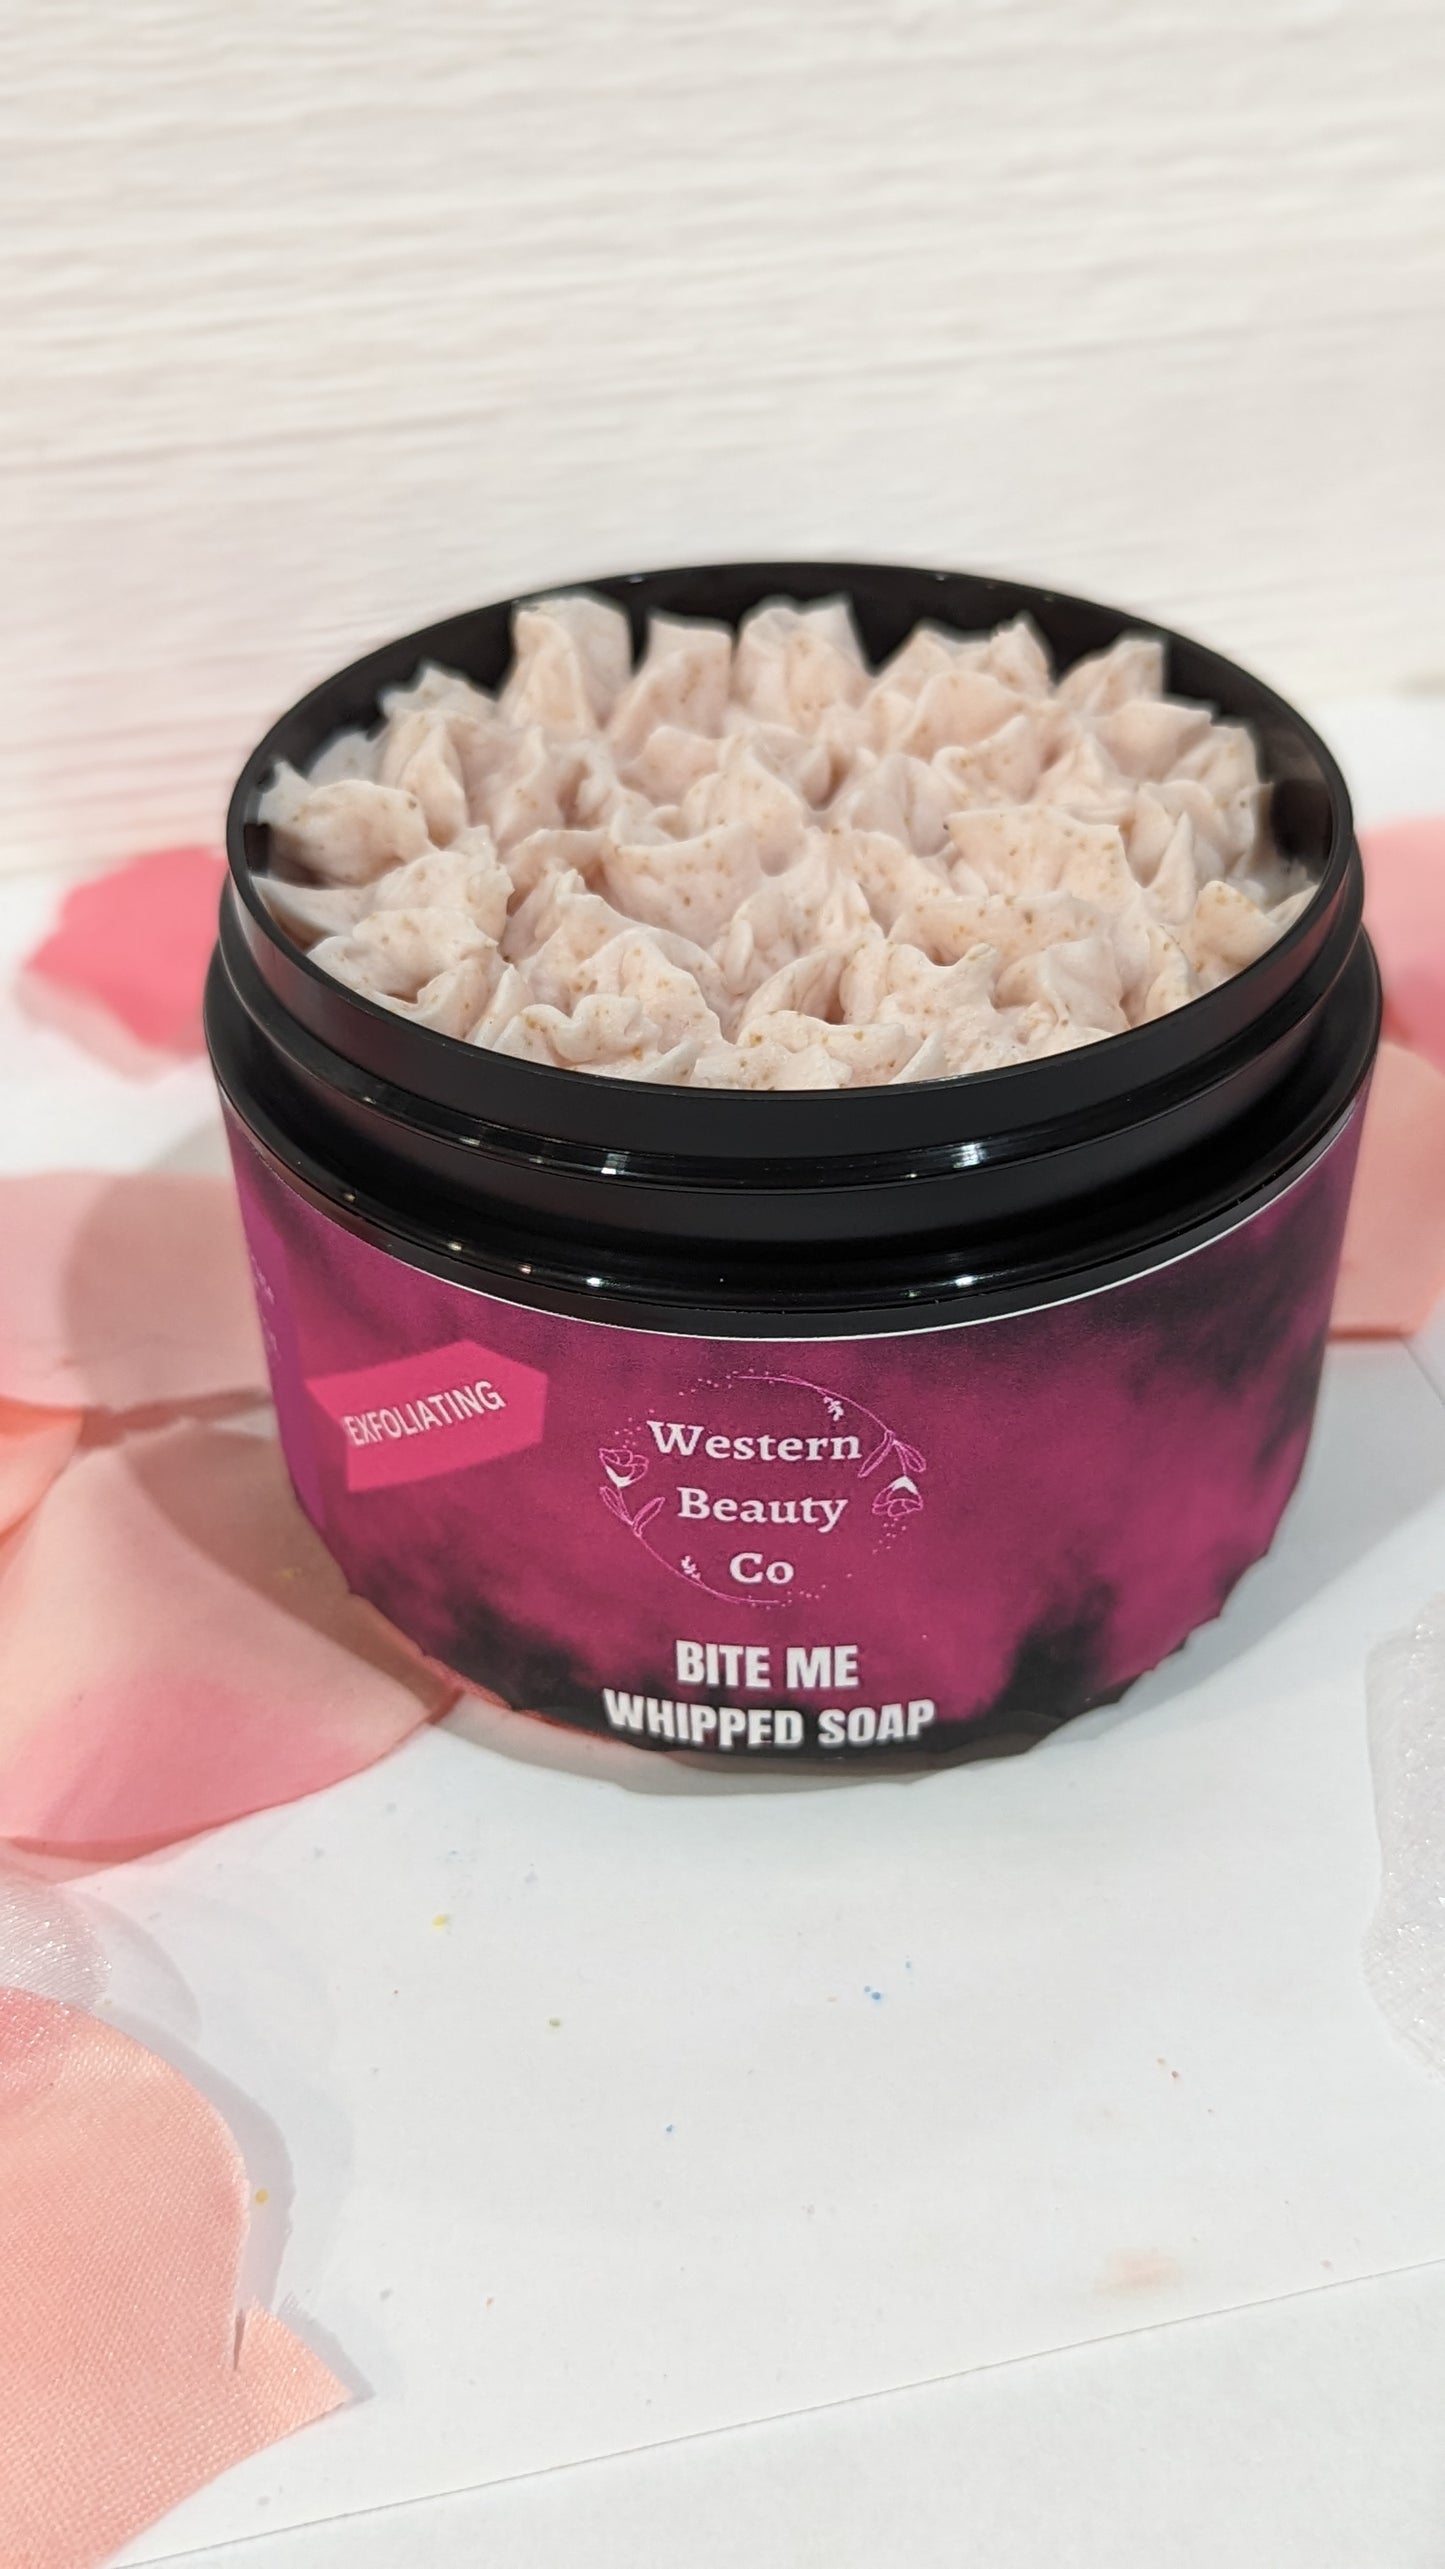 Bite Me Whipped Soap